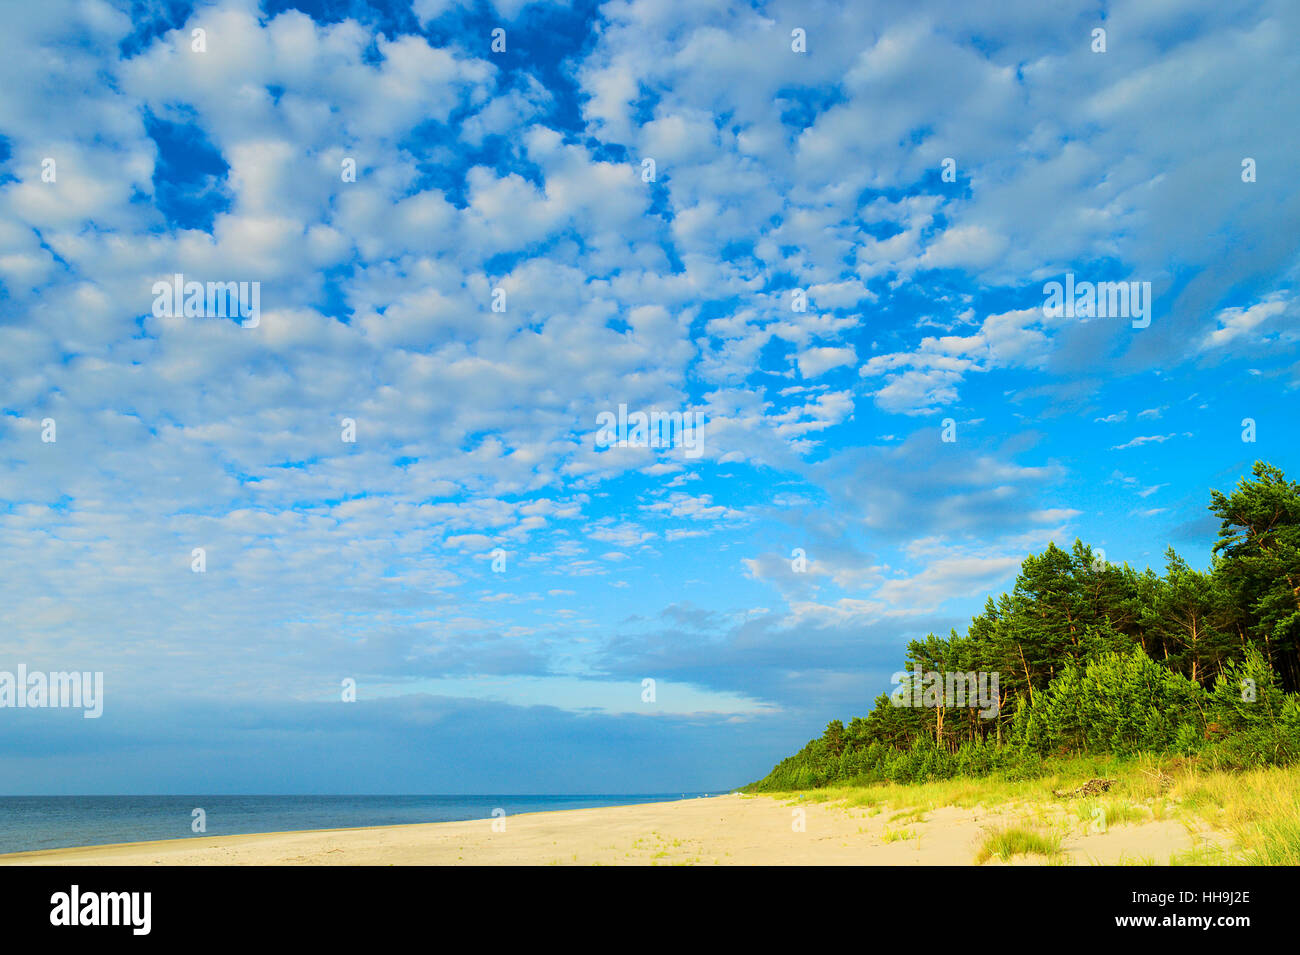 Cloudscape with stratocumulus cloud formation on sky over the beach at Baltic sea. Stegna, Pomerania, northern Poland. Stock Photo